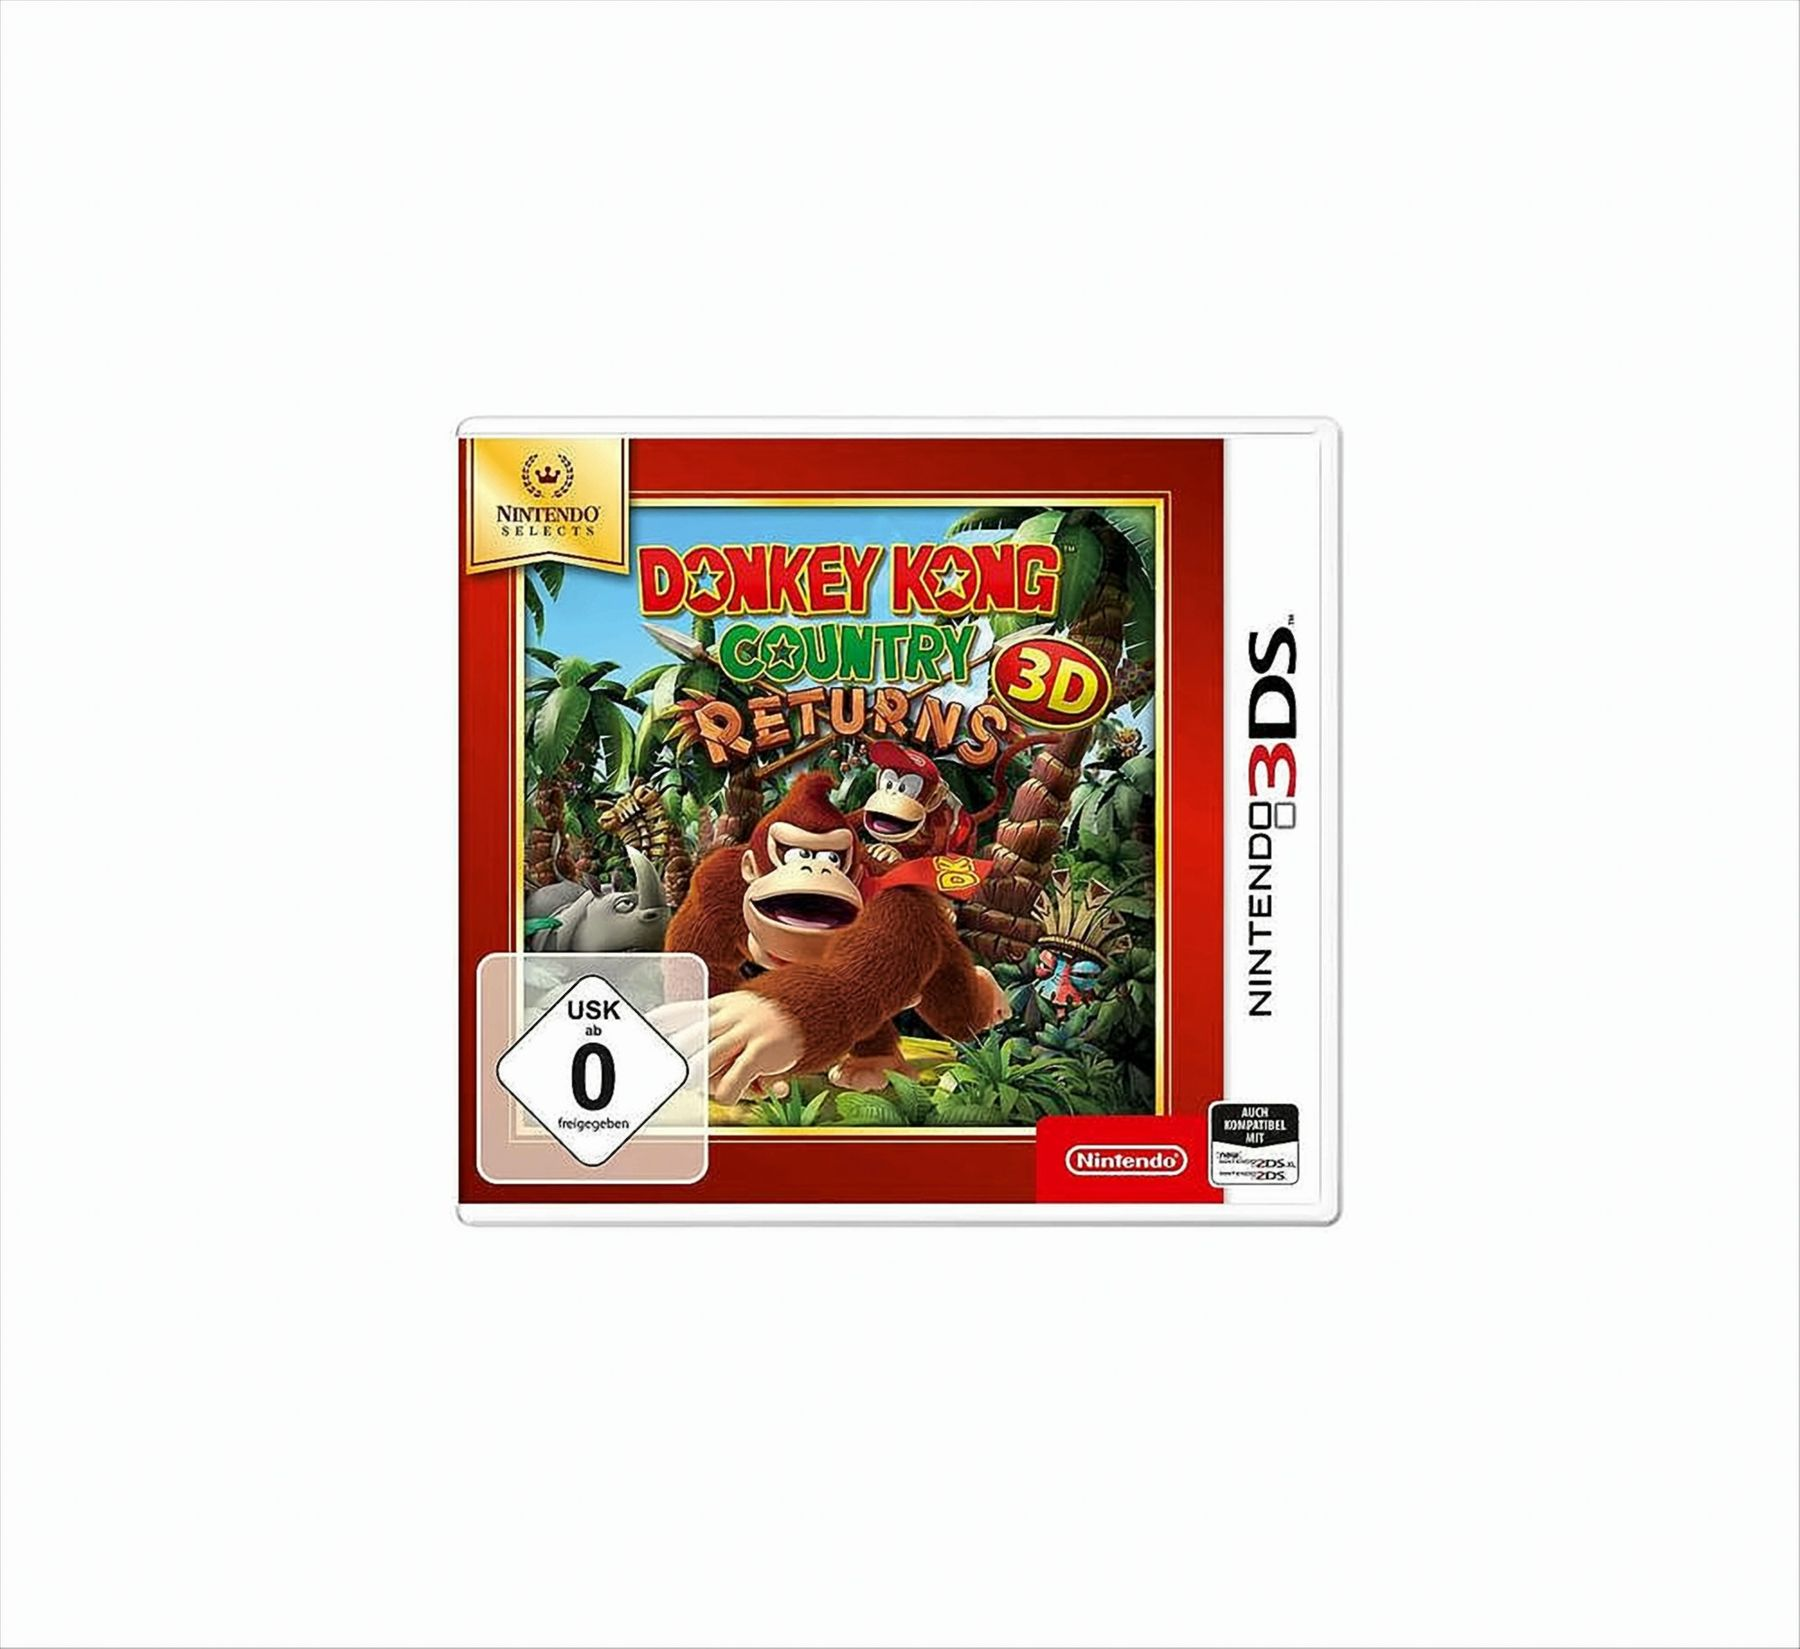 Donkey 3DS 3D Kong Country SELEC Returns TS - 3DS] [Nintendo